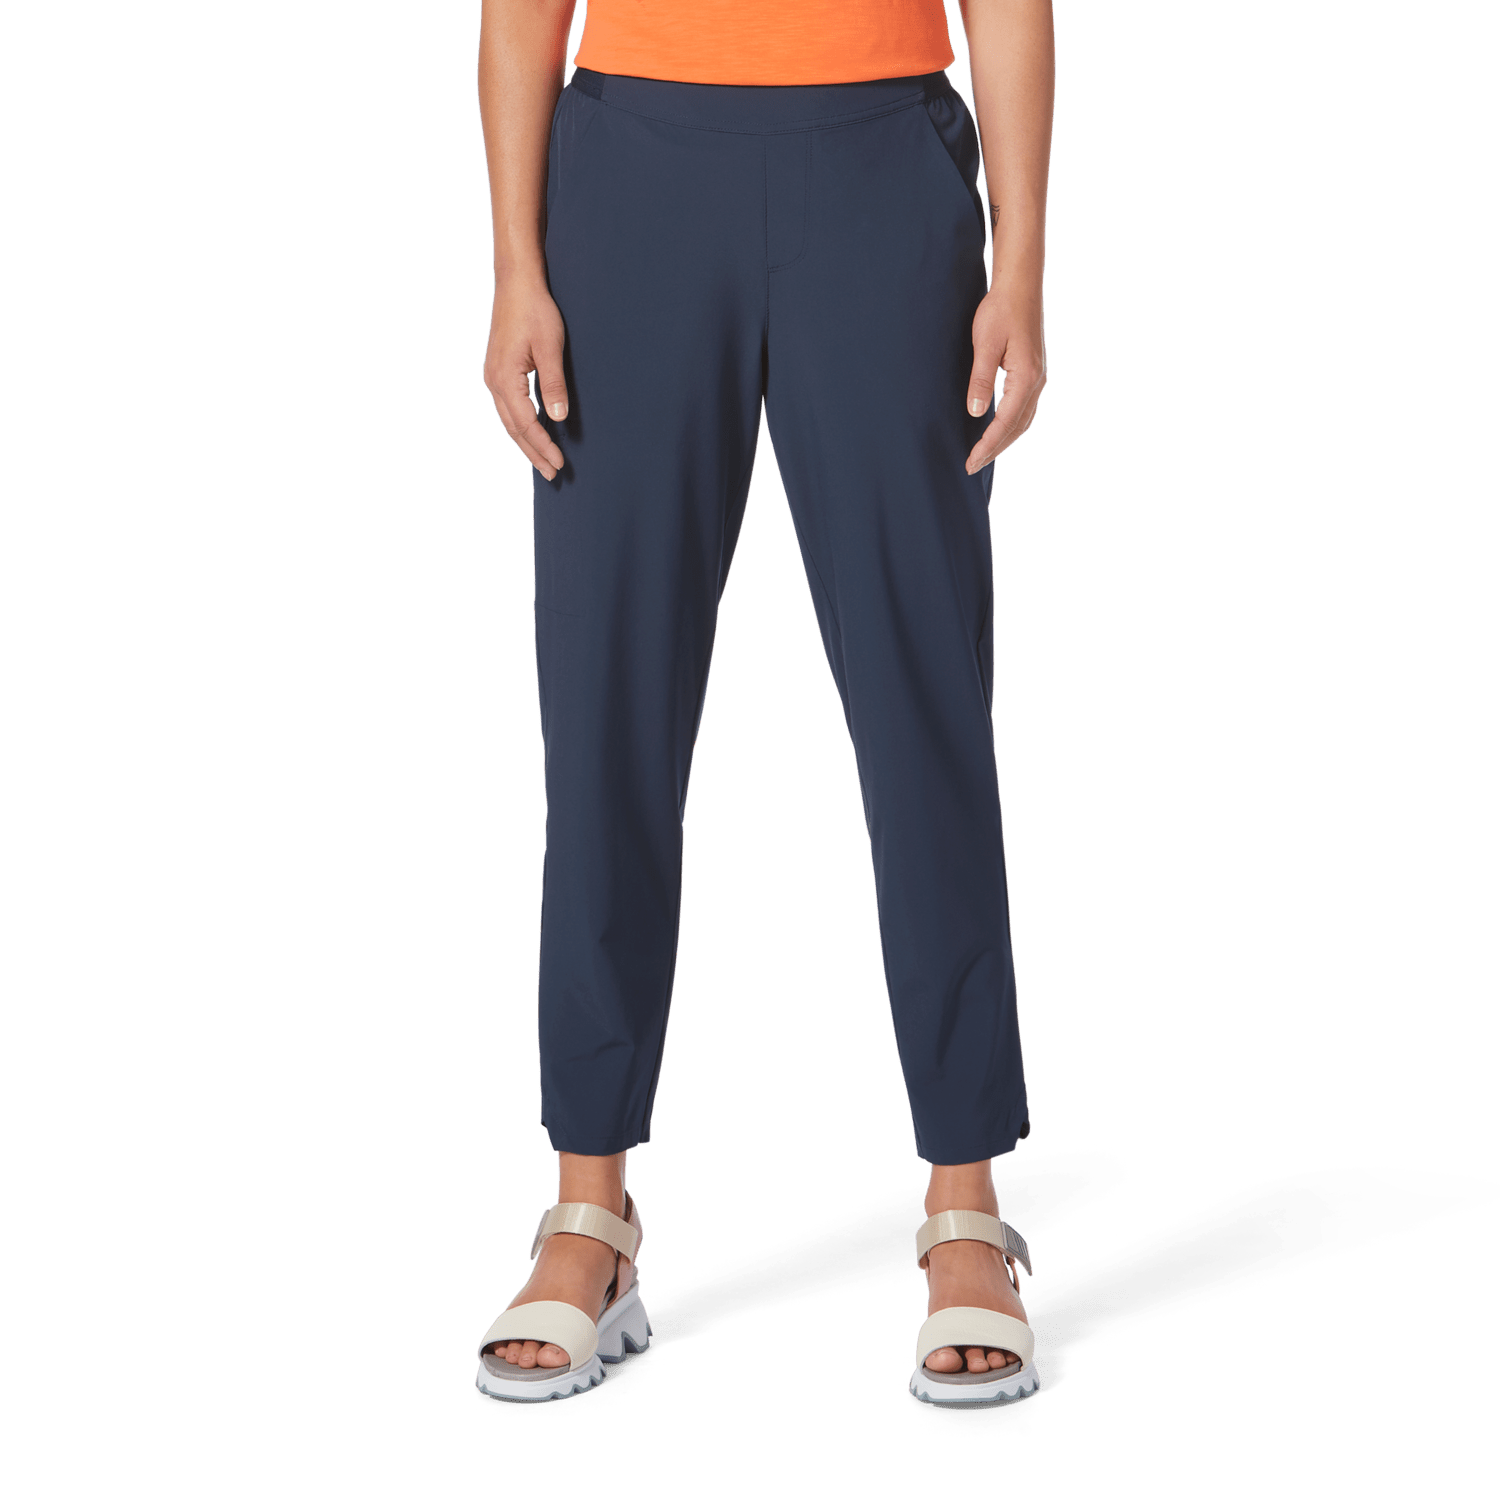 Royal Robbins - W's Spotless Evolution Pant - Recycled polyester - Weekendbee - sustainable sportswear